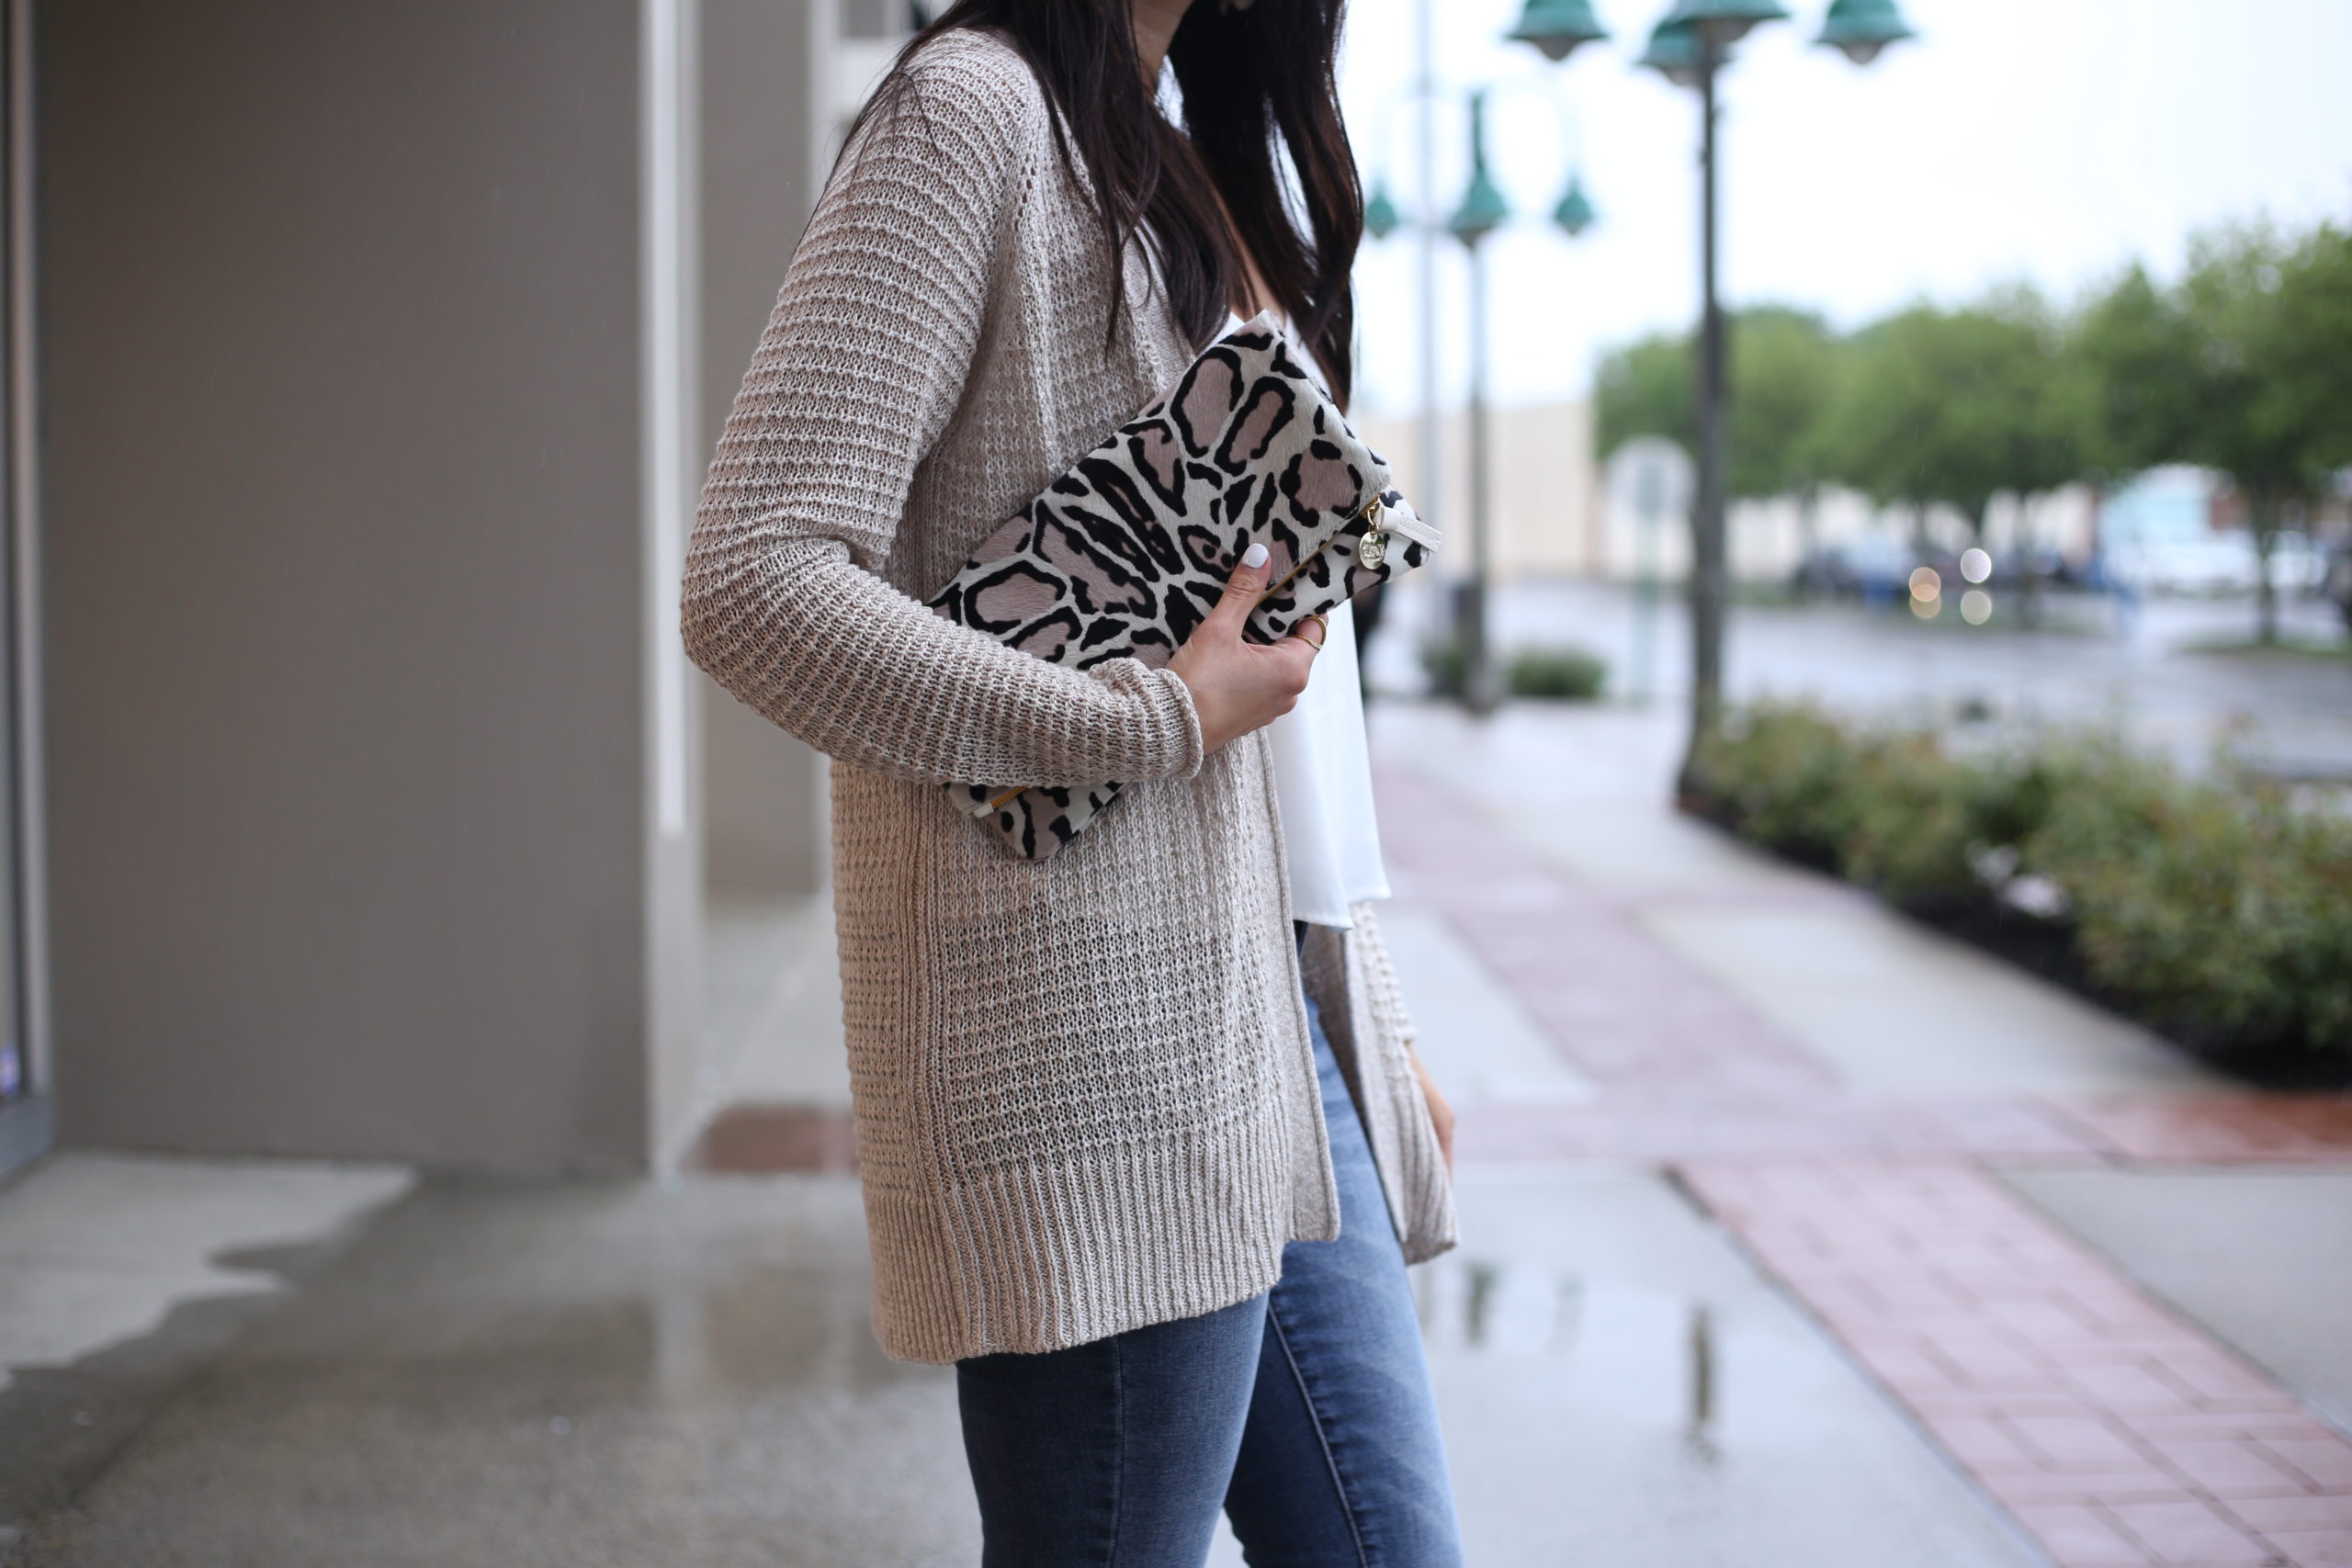 Anna Monteiro wearing a clare v clutch from nordstrom with leopard print